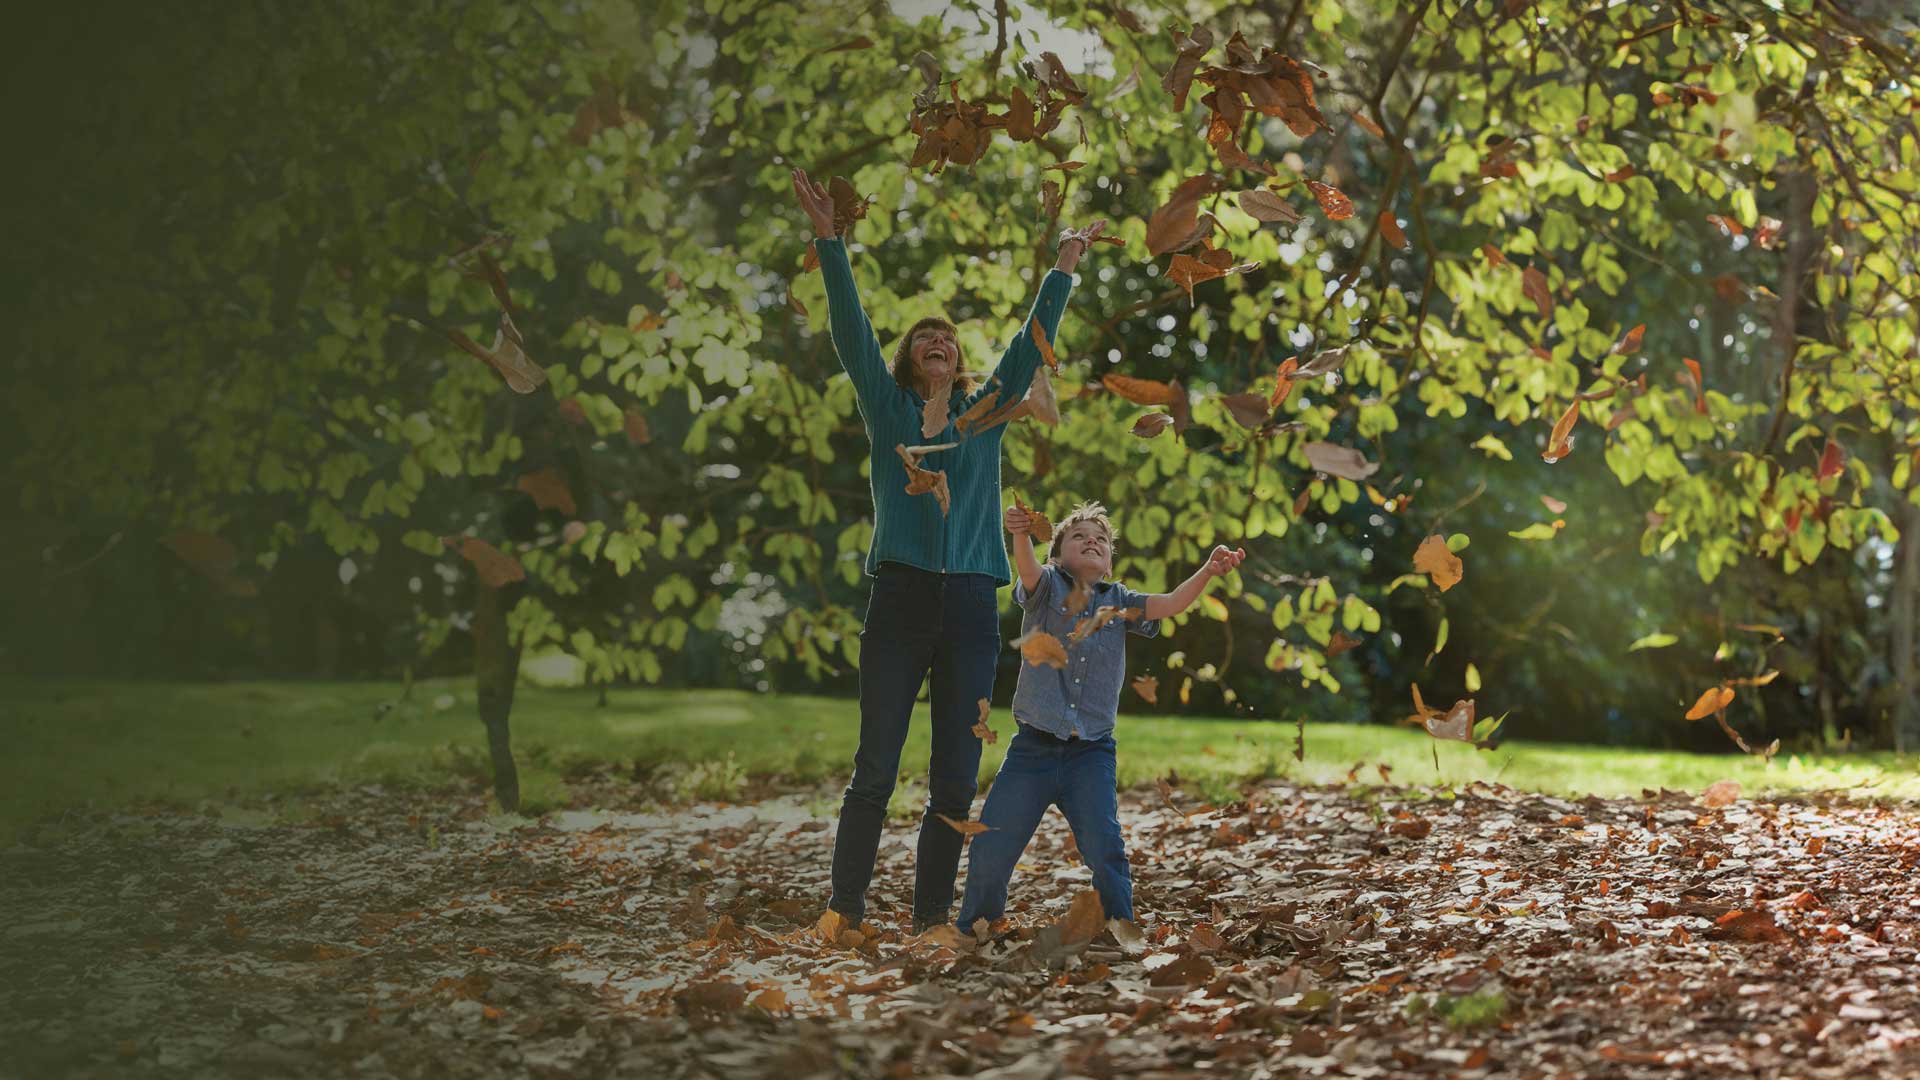 A woman and a young boy playing, throwing leaves under trees in a park